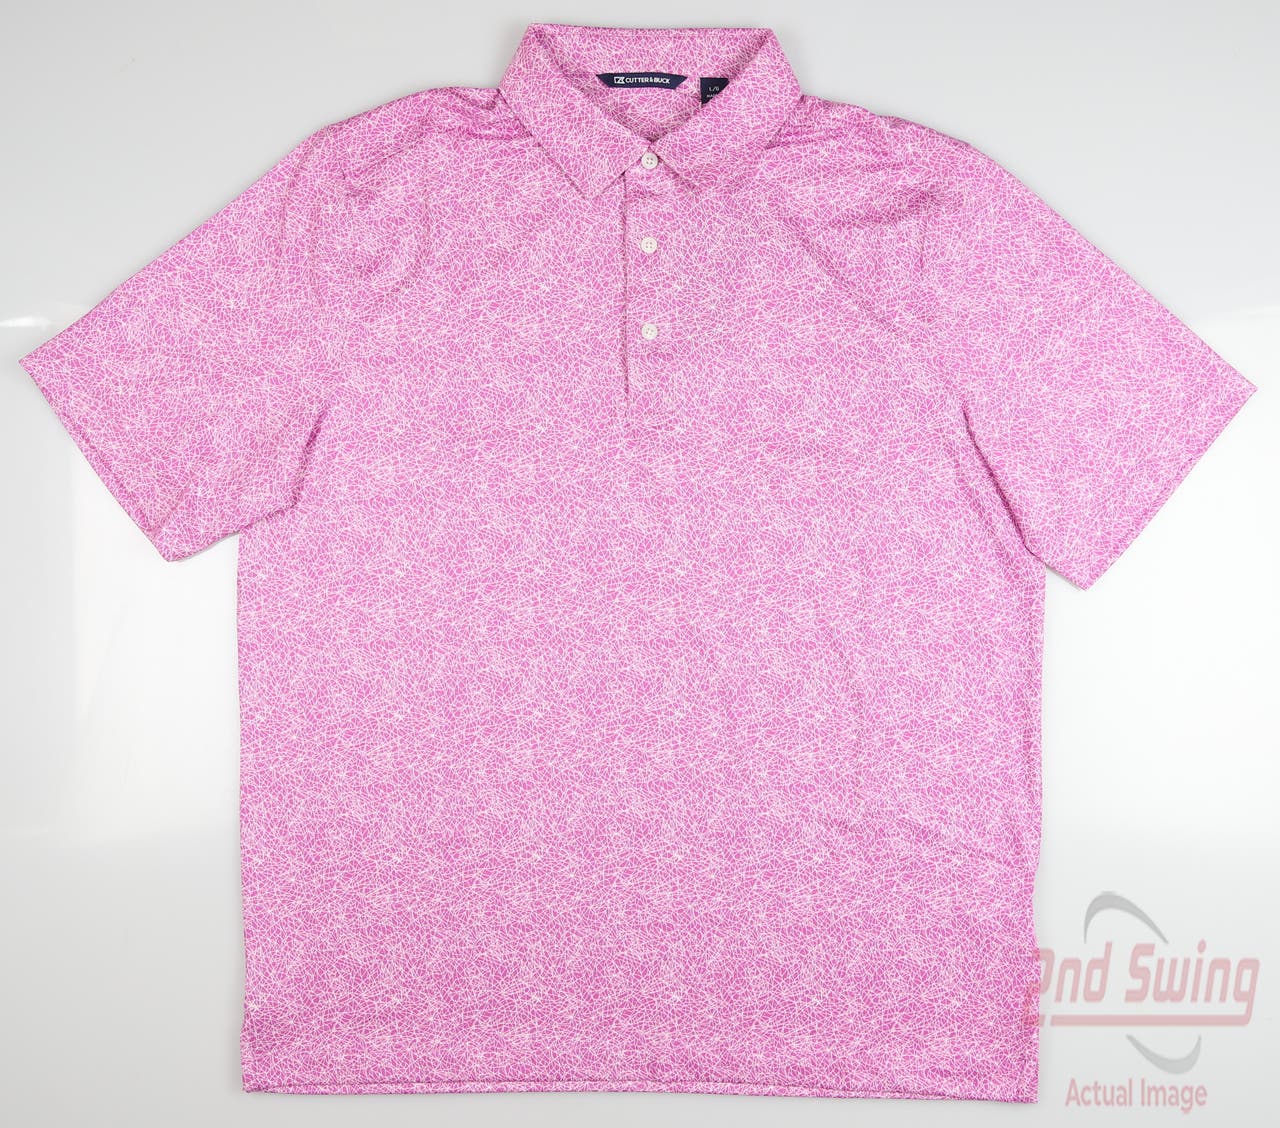 New Mens Cutter & Buck Golf Polo Large L Pink MSRP $85 MCK01133